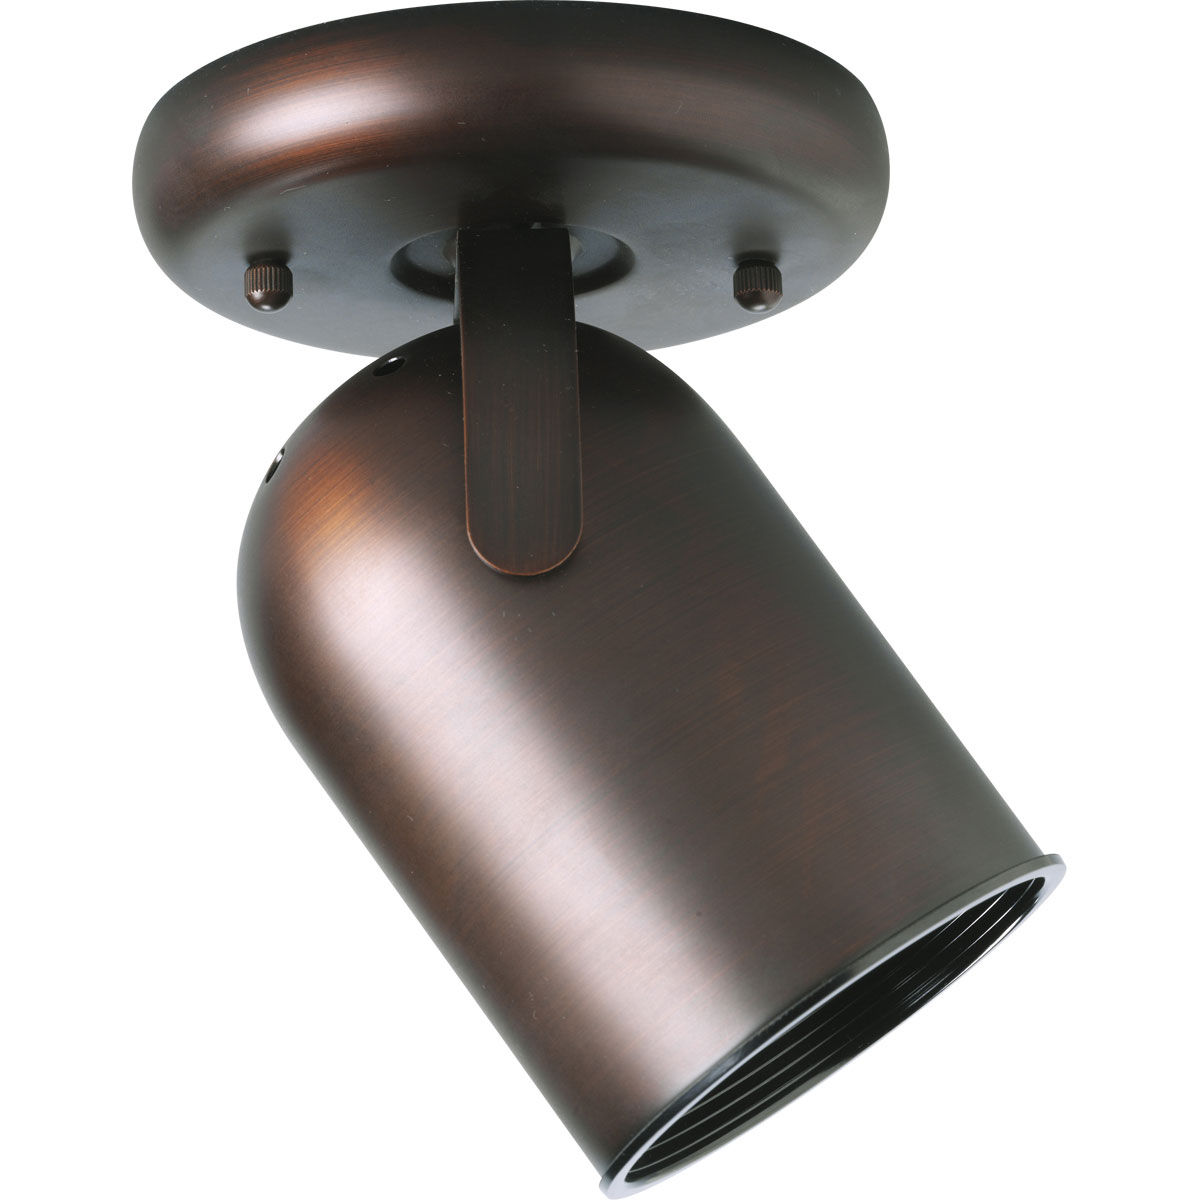 The contemporary design of this Progress Lighting one-light fixture updates the look of any room in your home. This multi-directional light comes in a clean, Urban Bronze finish that complements almost any style. One-light round back ceiling mount directional in Urban Bronze finish.